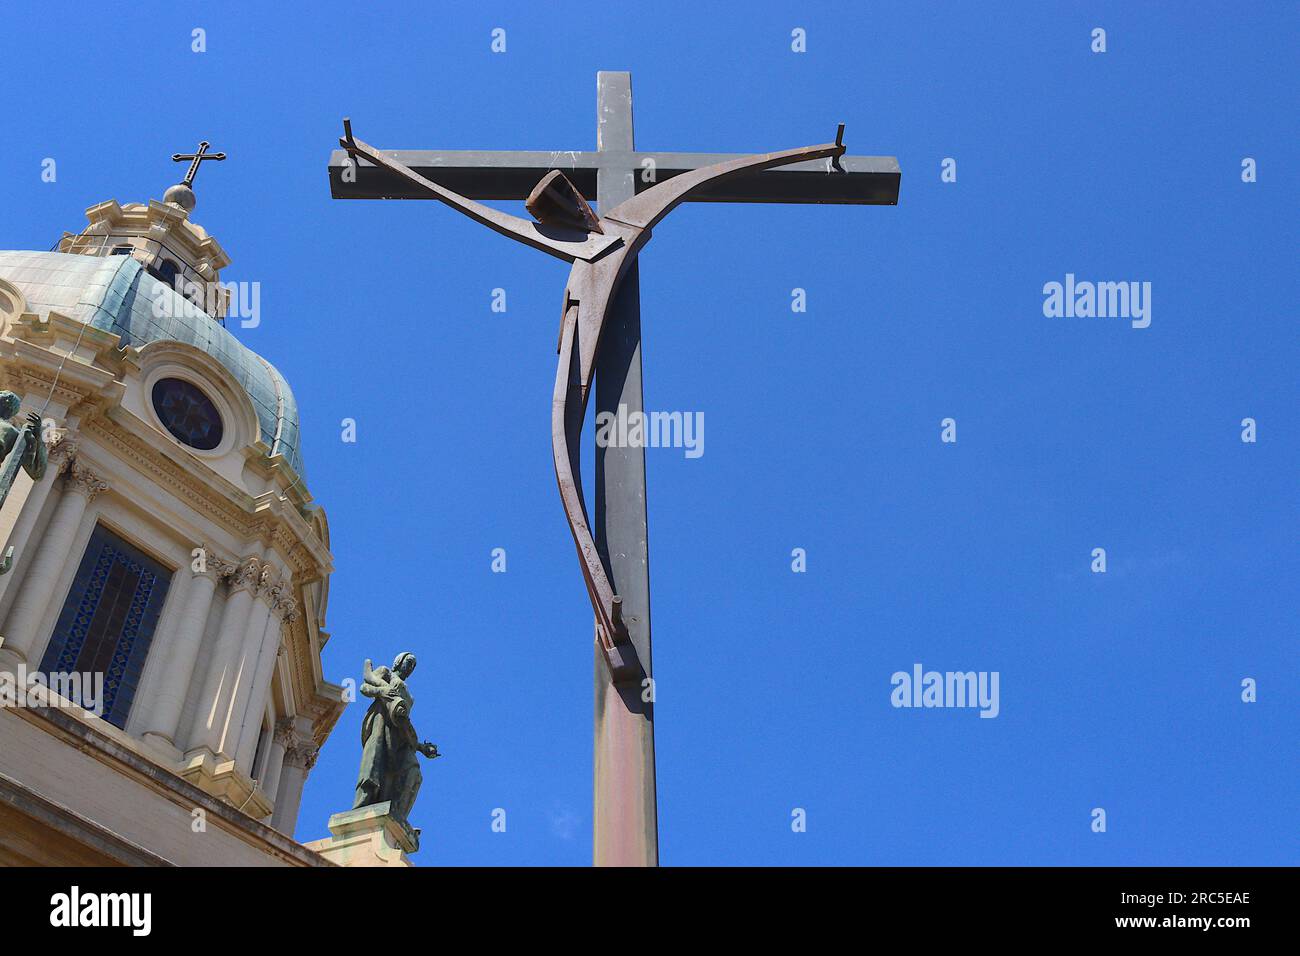 Stylized steel monument of the Crucifixion attributed to the sculptor Morganti, mounted at the viewing area in front of the Church of Christ the King. Stock Photo